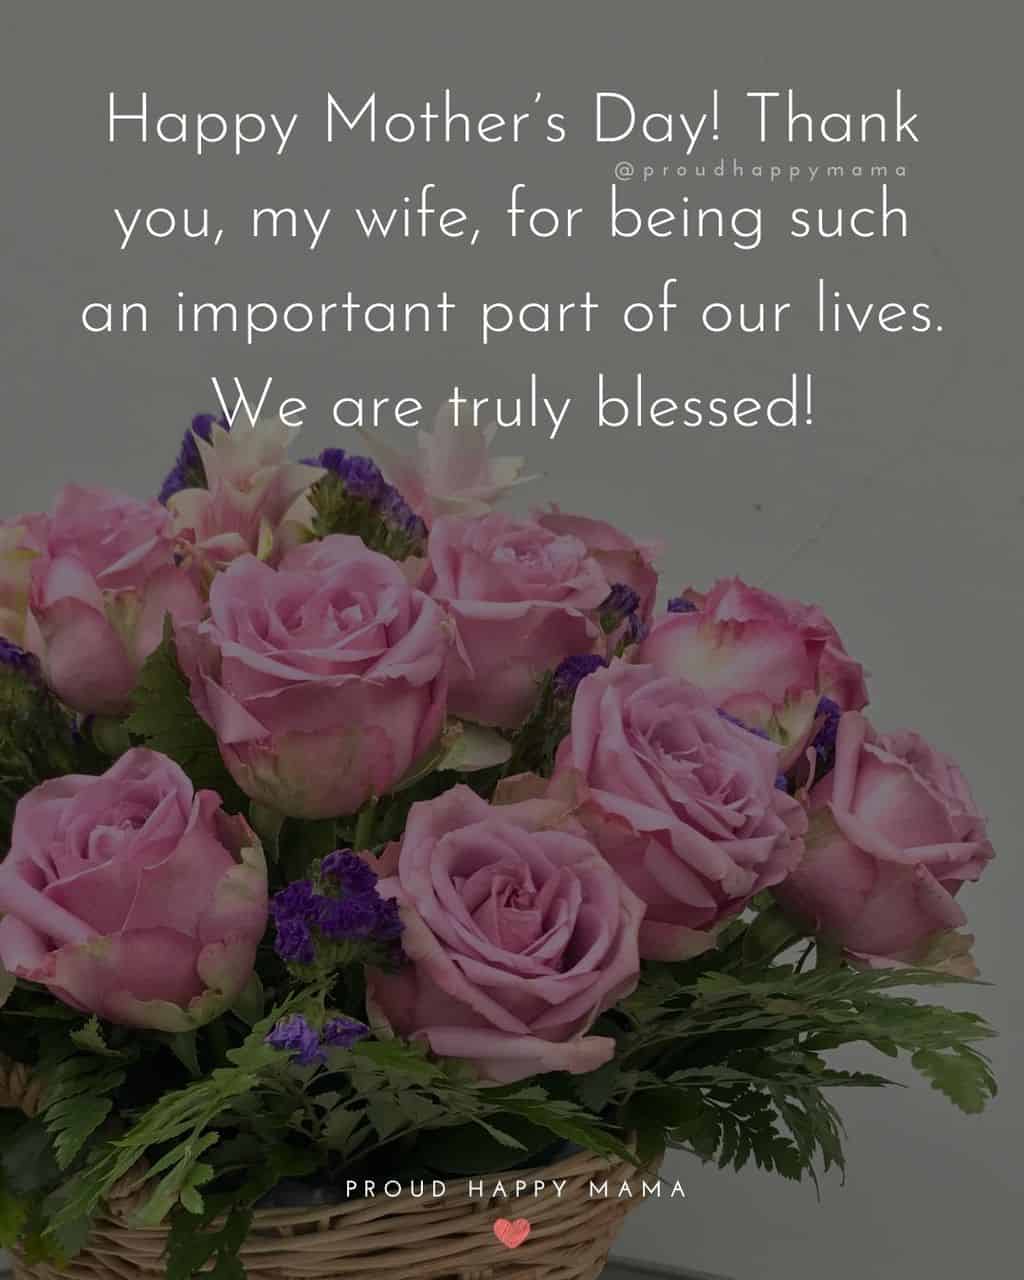 Happy Mothers Day Quotes For Wife - Happy Mother’s Day! Thank you, my wife, for being such an important part of our lives.